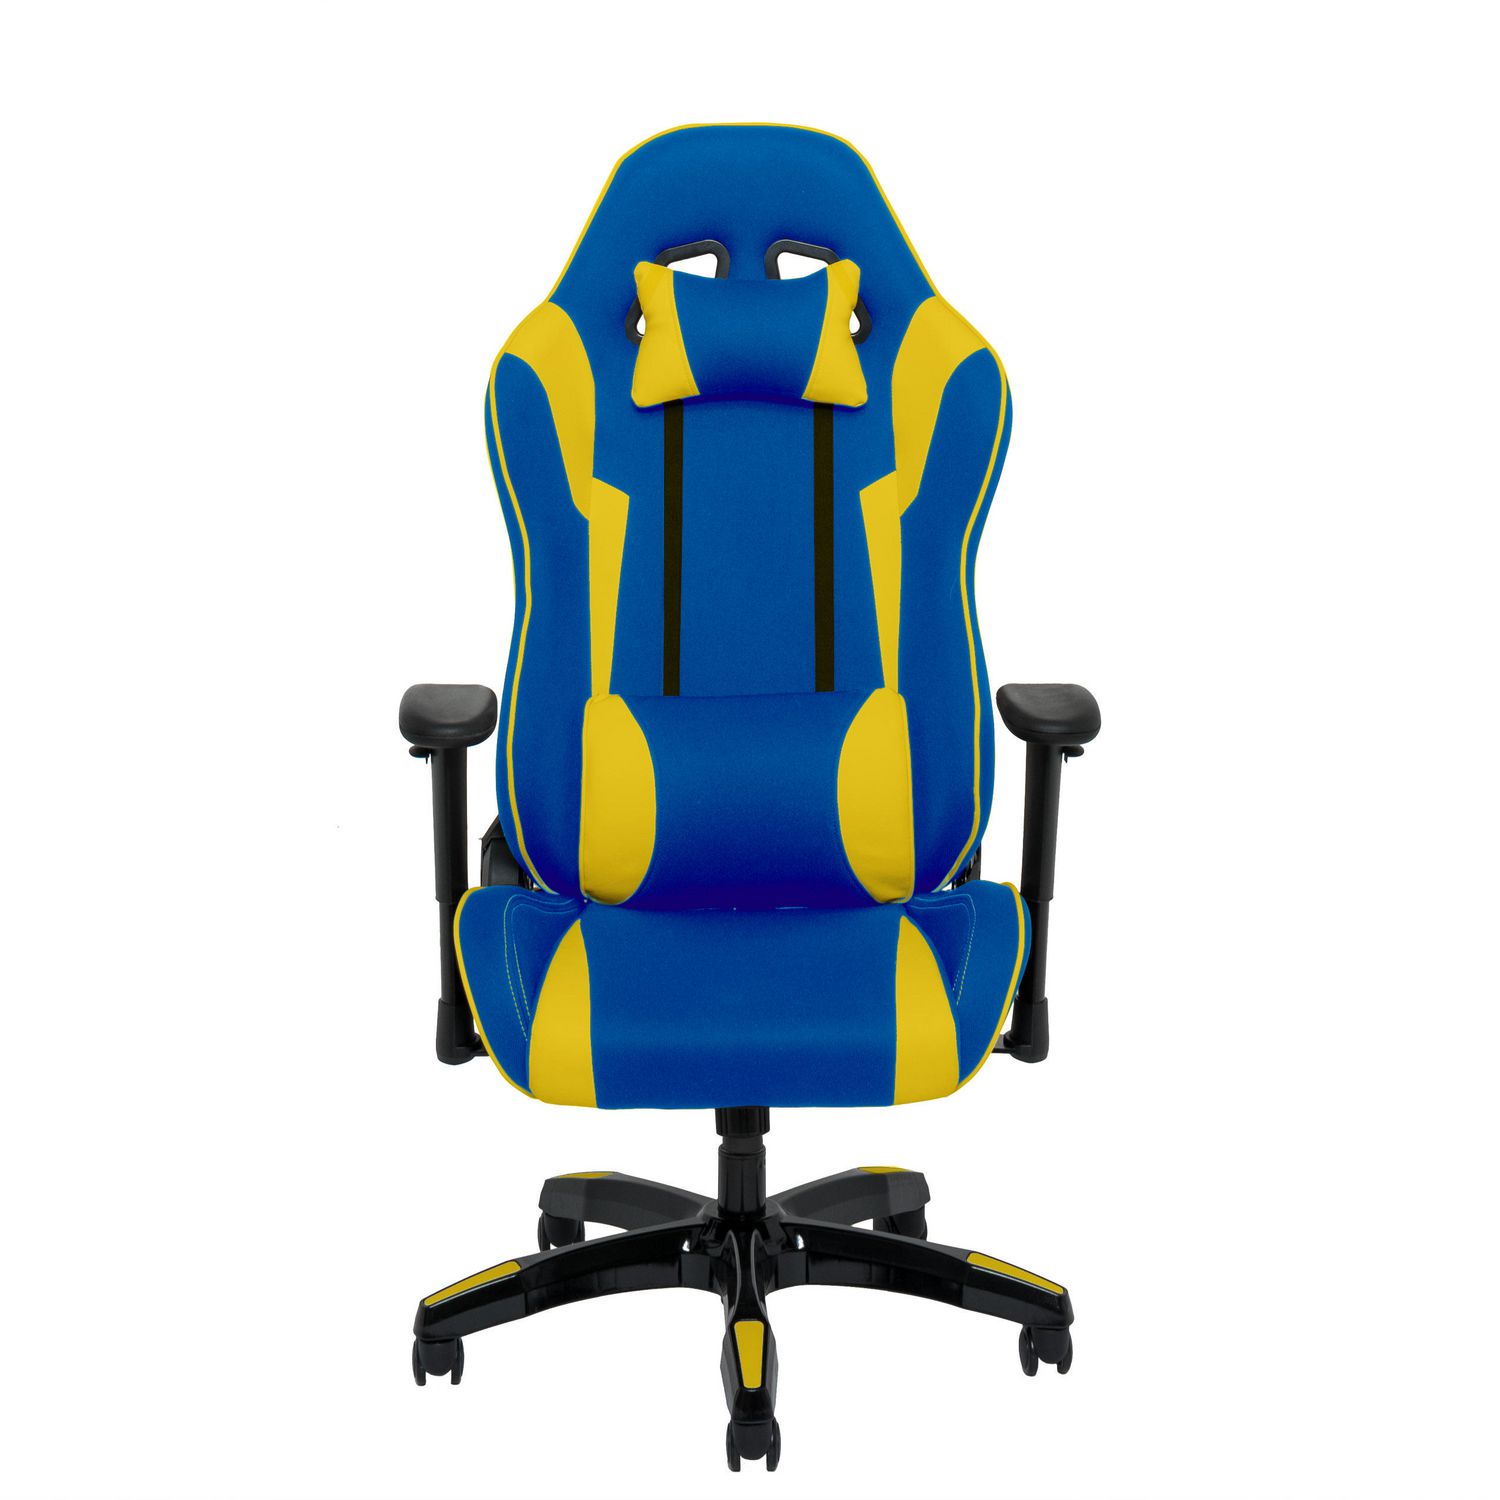 CorLiving Blue and Yellow High Back Ergonomic Gaming Chair | Walmart Canada